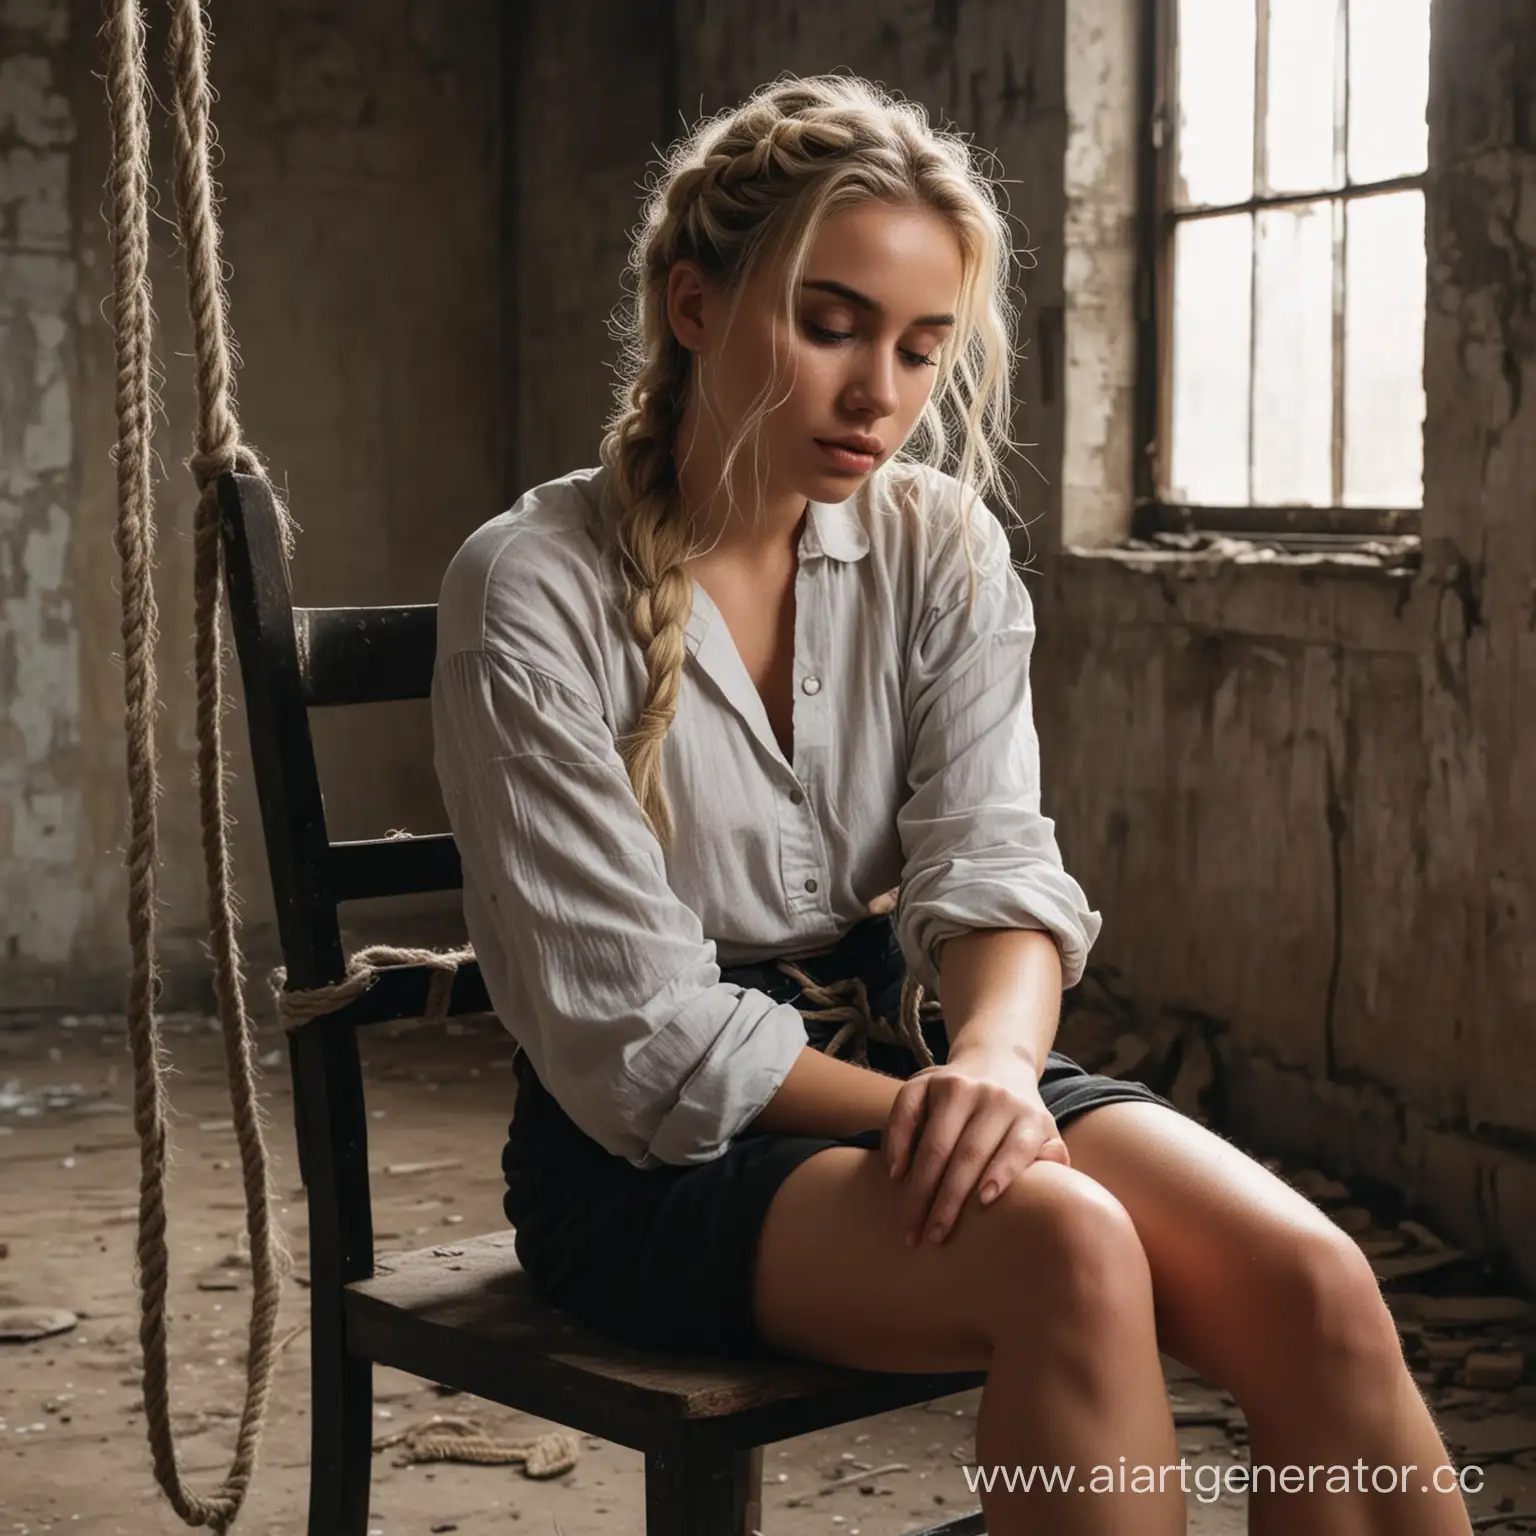 Rescued-Blonde-Girl-Tied-Up-in-Abandoned-Building